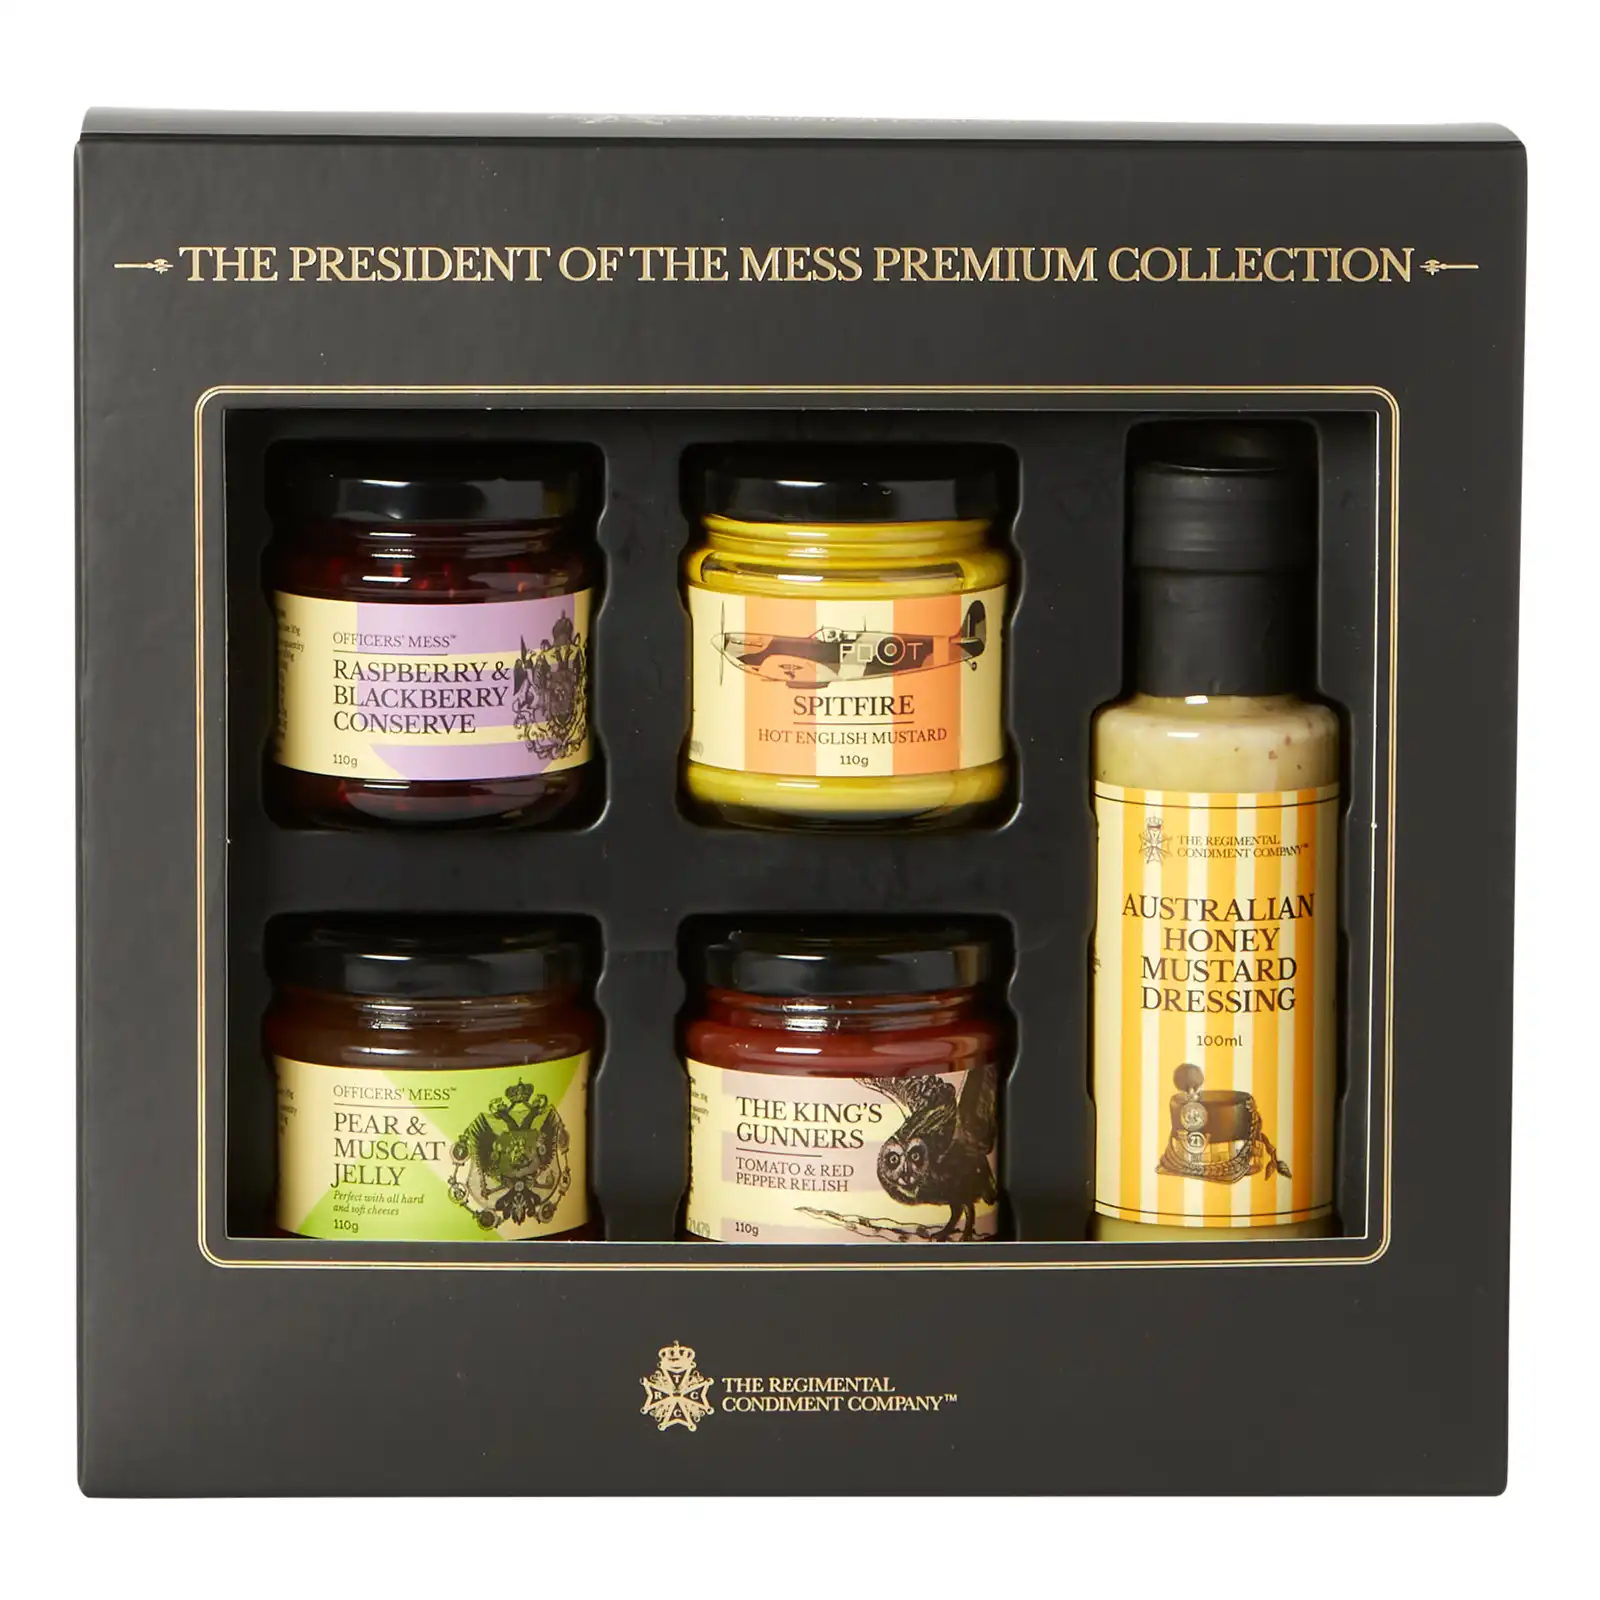 TRCC - The President of the Mess Premium Collection - 4 Jar 1 Bottle (1) Jam (1) Chutney (1) Mustard (1) Cheese Jelly (1) Dressing